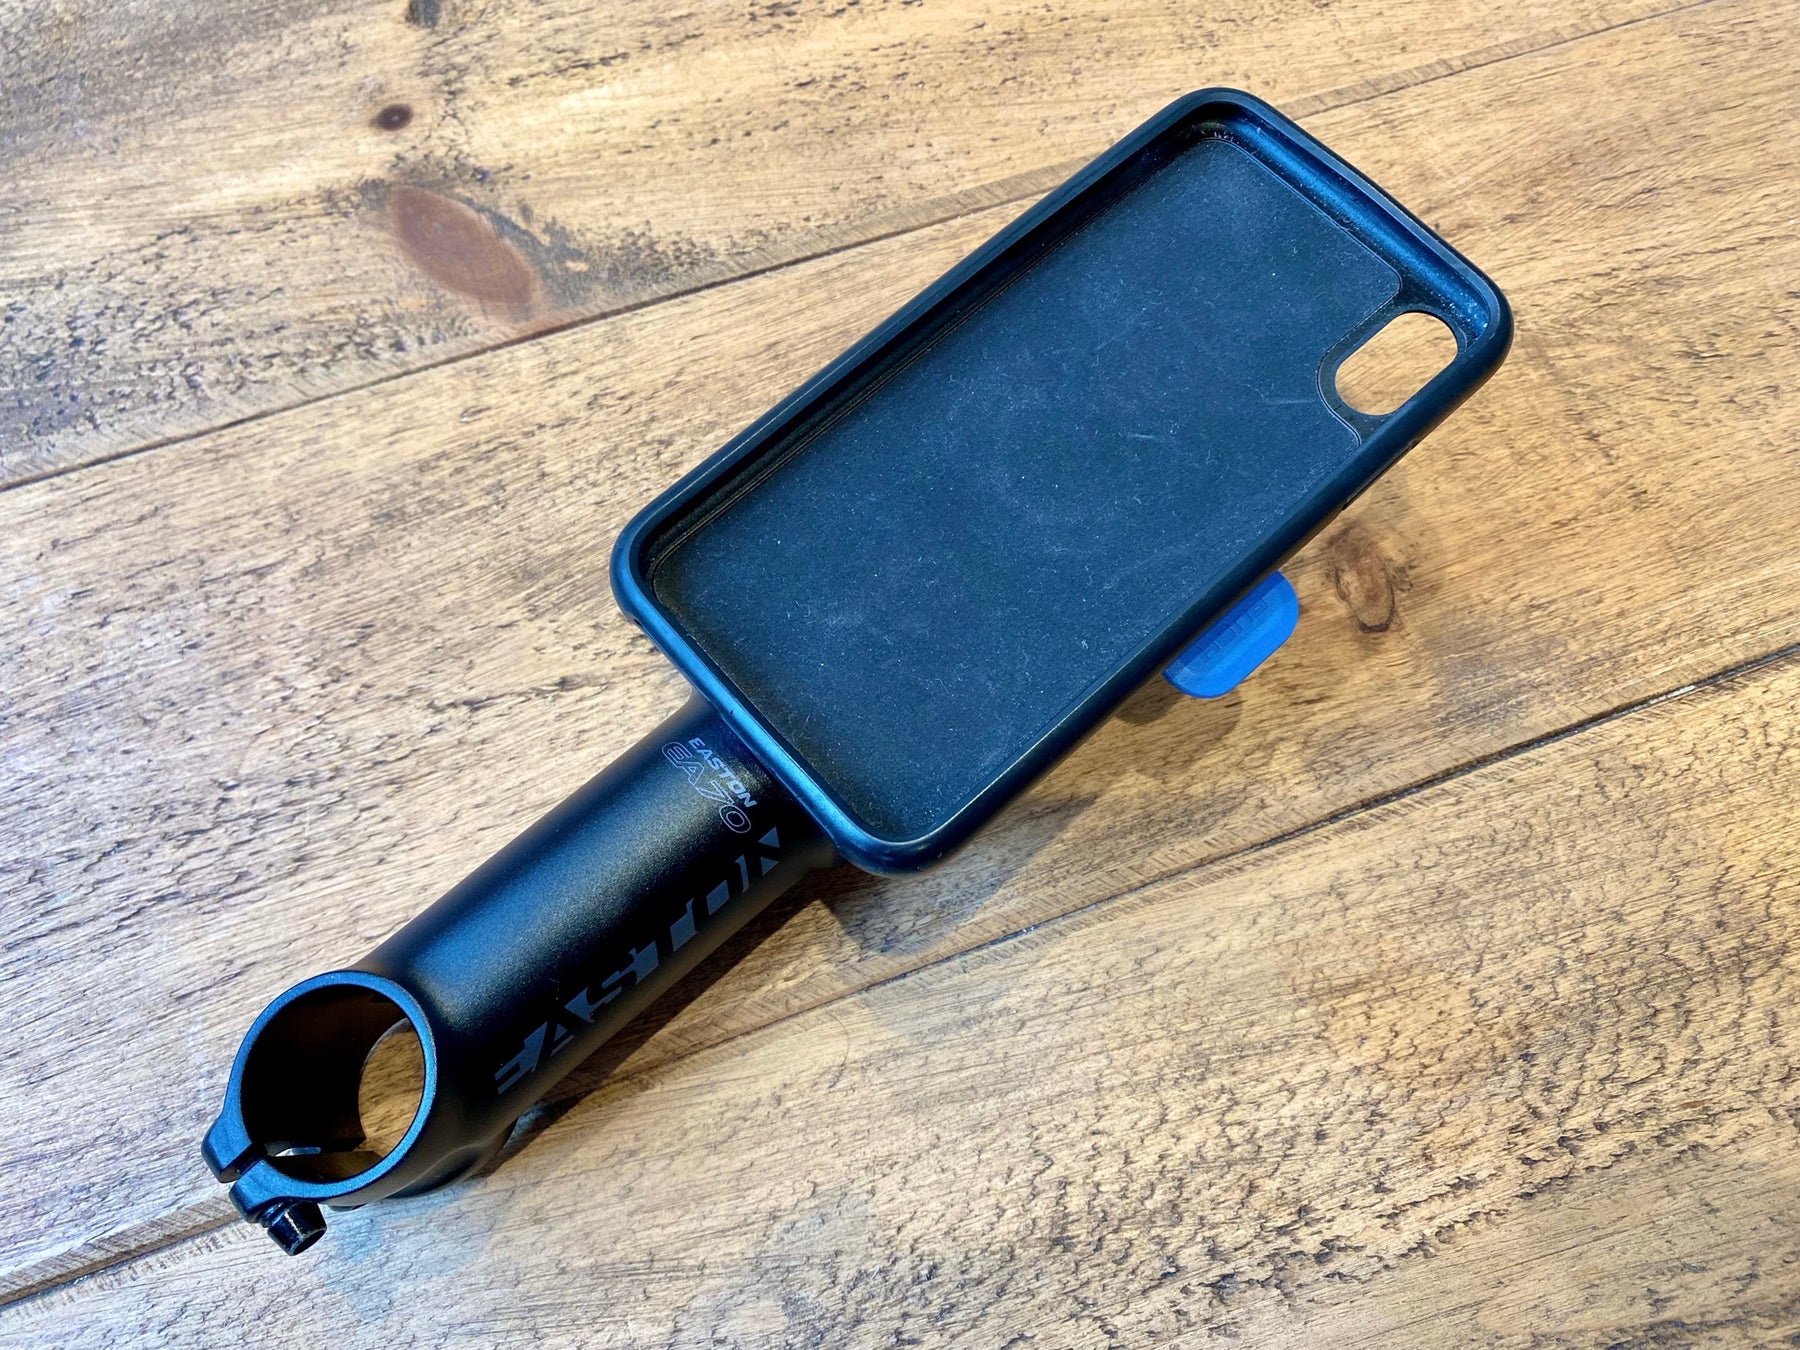 MagCAD Garmin to For Quad Lock Adapter - Cycling 3D Printed GPS Edge iPhone